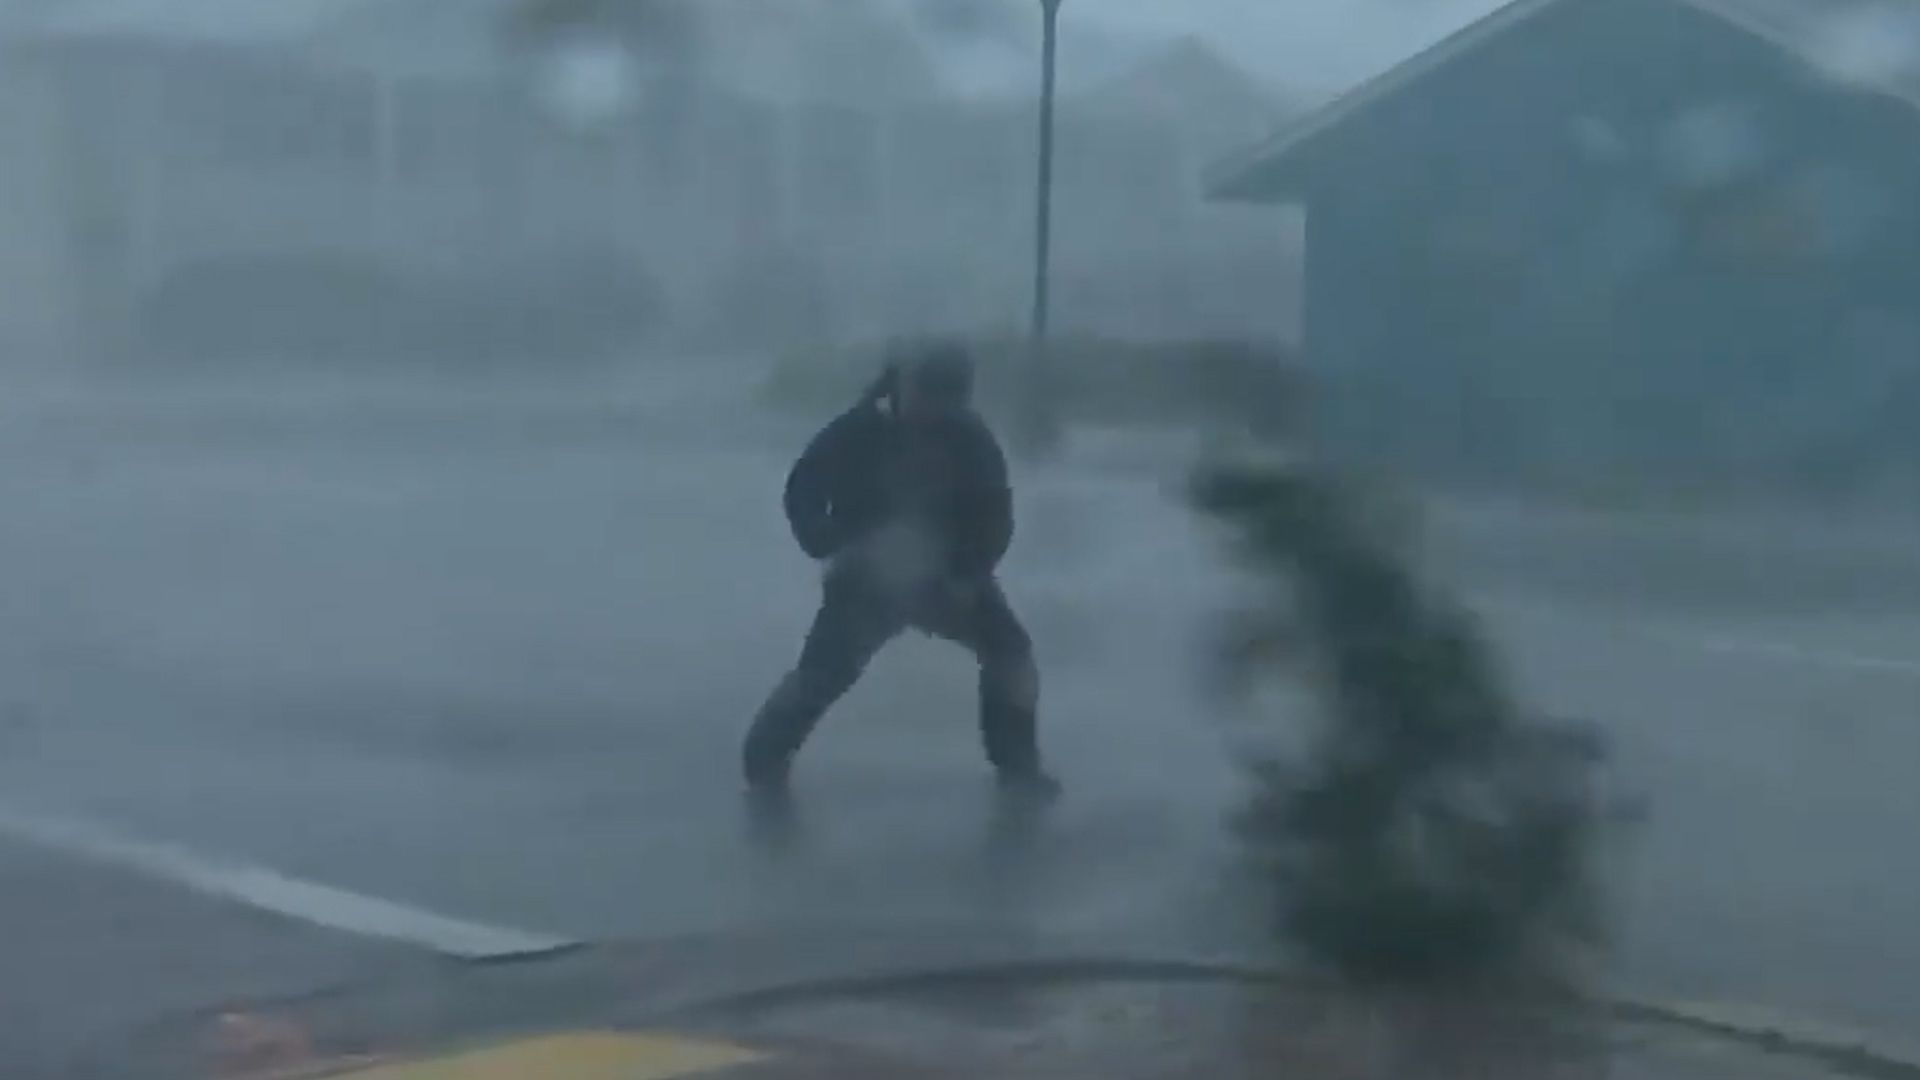 Watch: The Weather Channel reporter, Jim Cantore, hit by branch